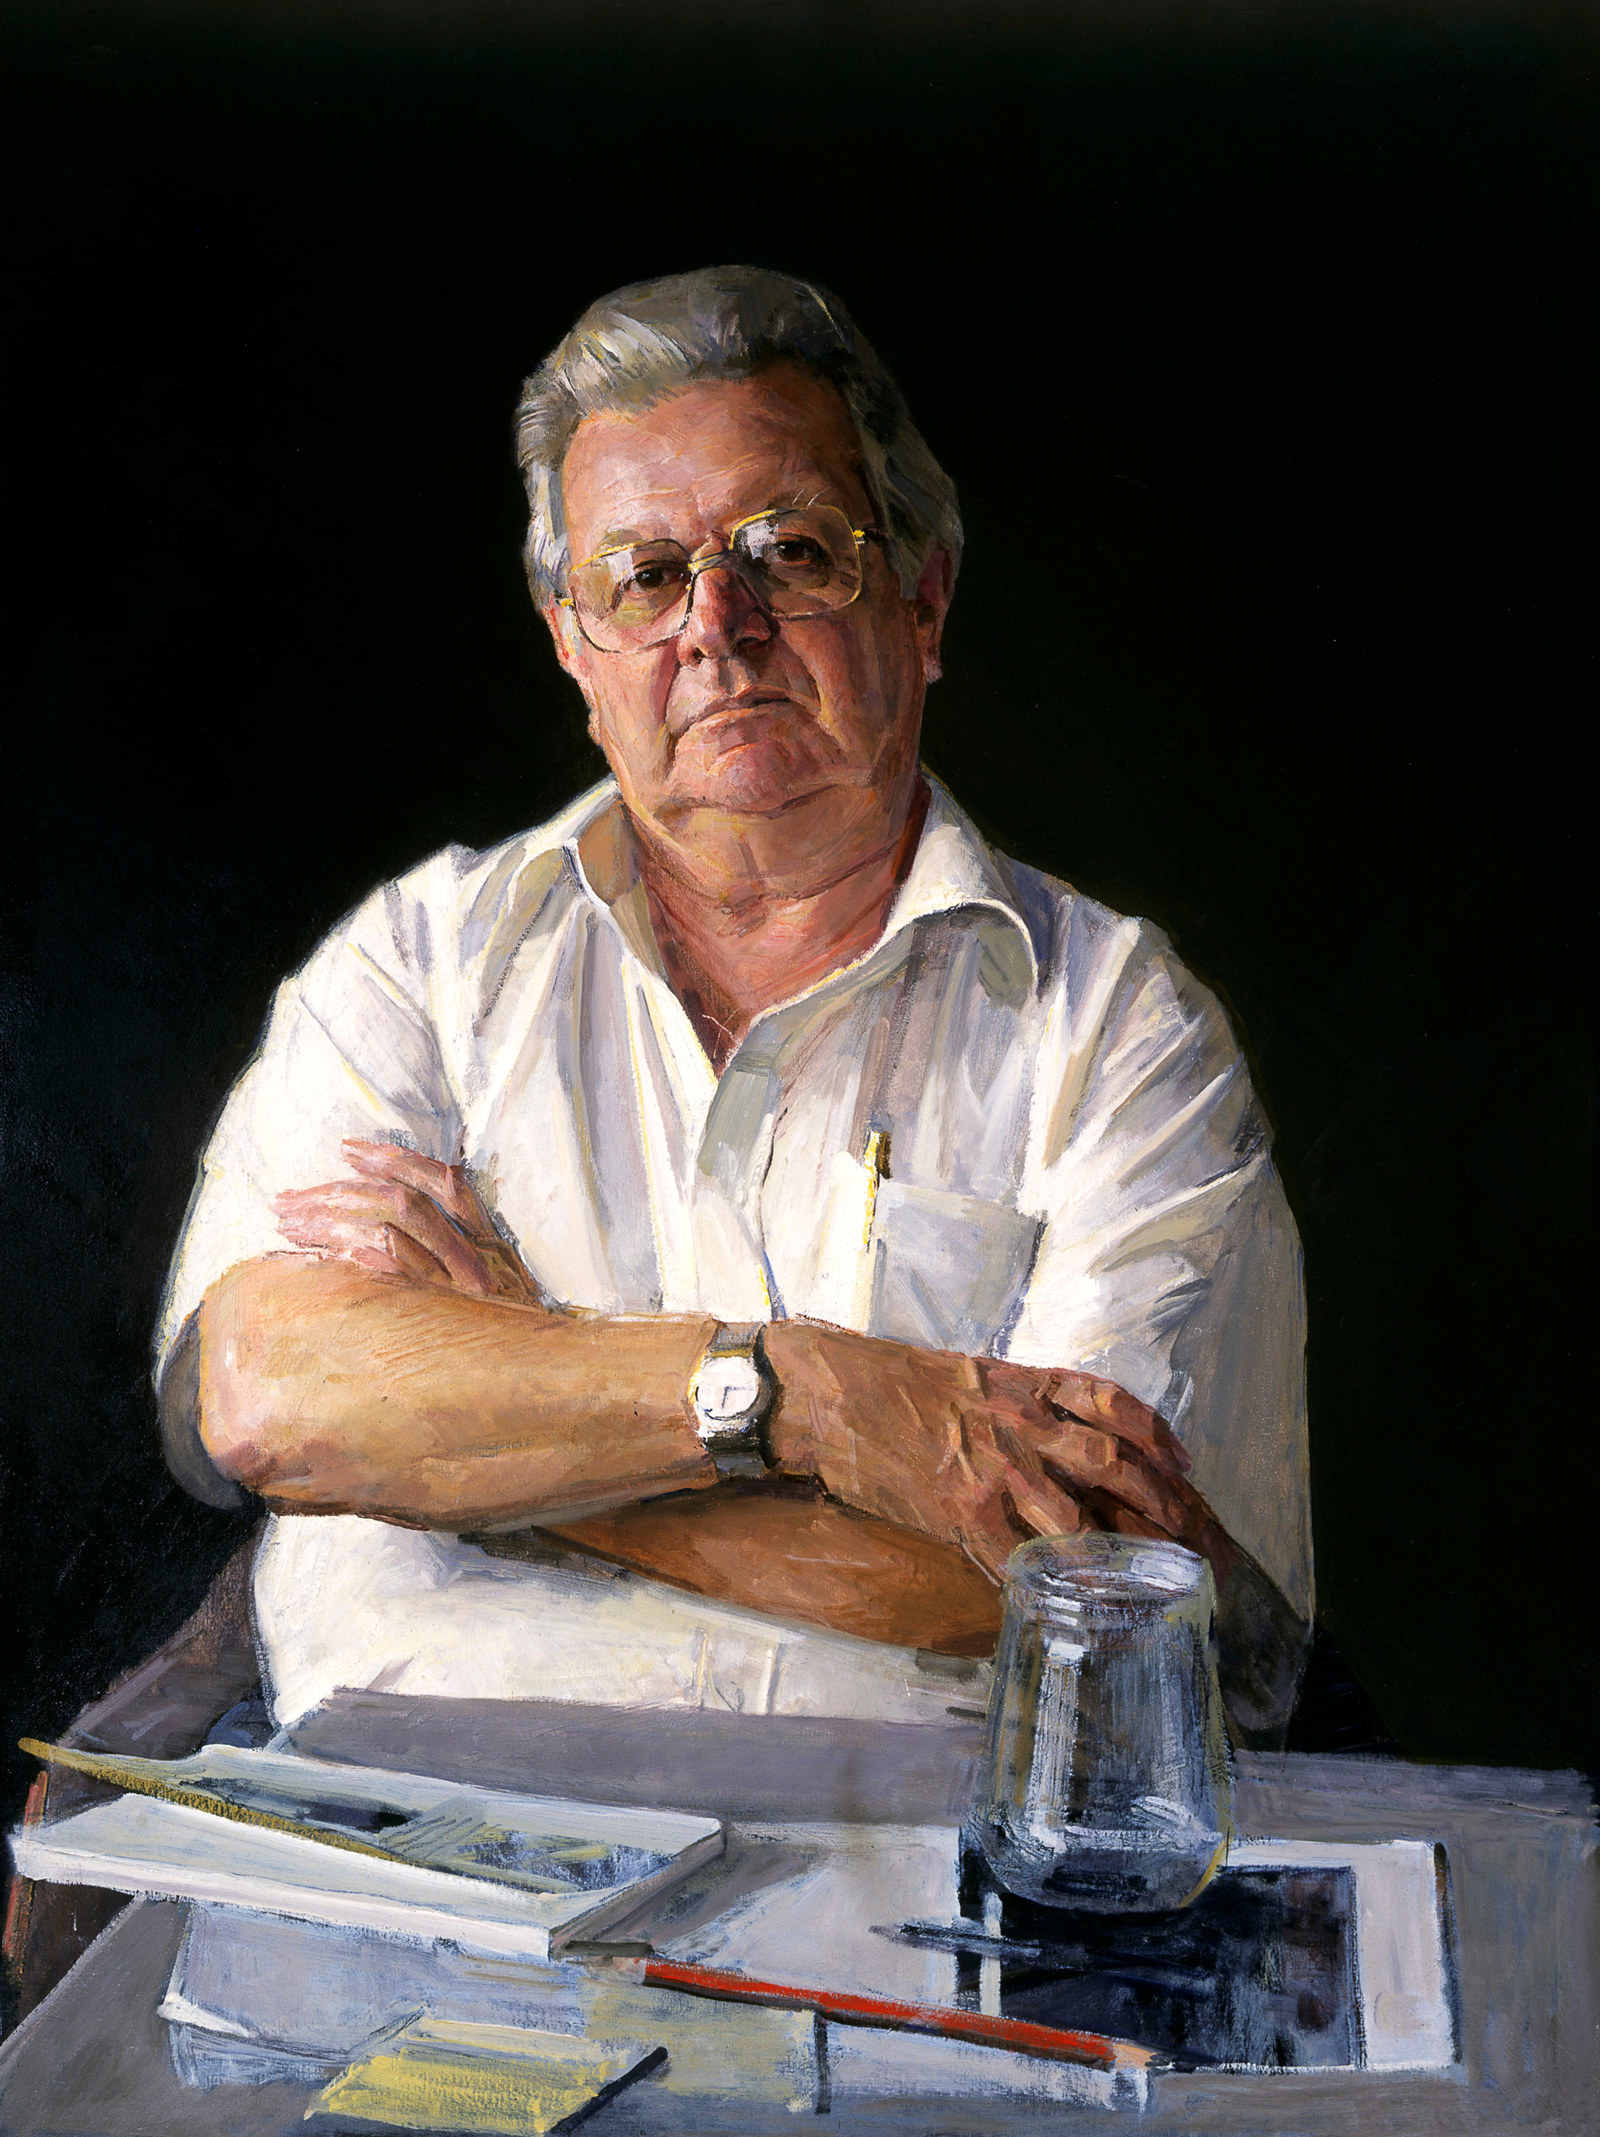 Painting of man with silver hair and glasses, in white shirt with sleeves rolled up, looking directly at painter.